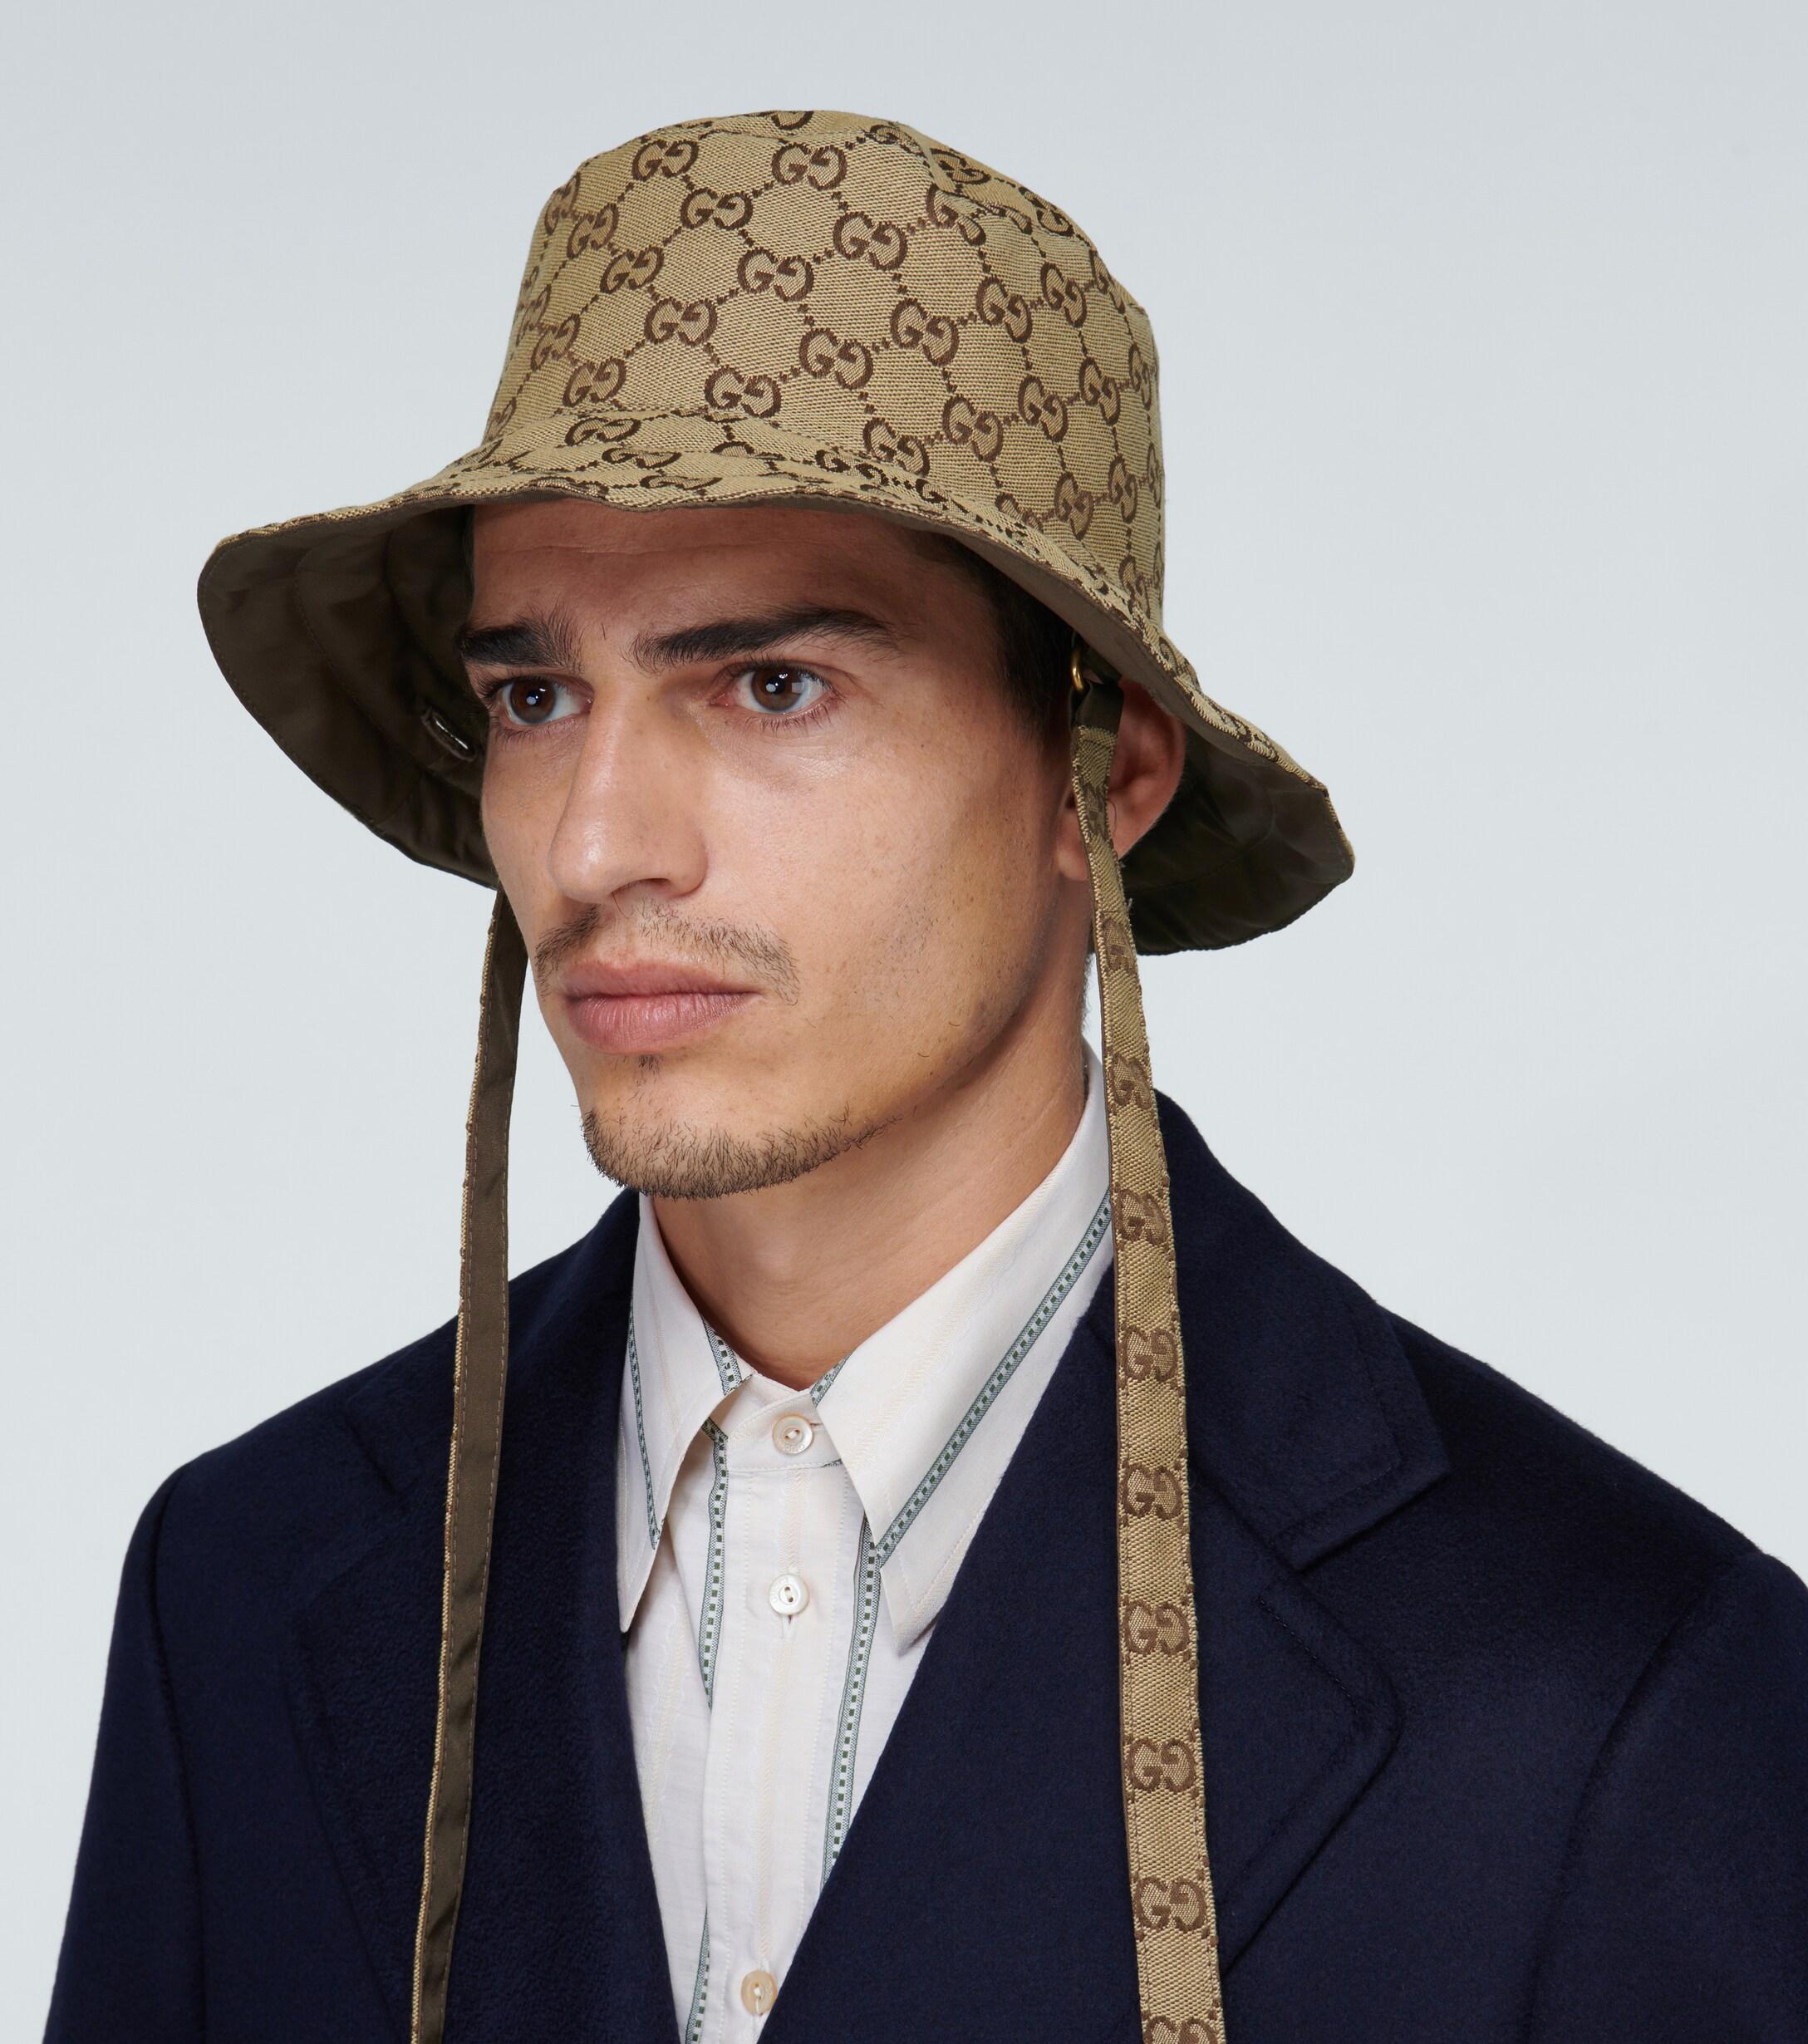 Gucci Canvas Reversible Bucket Hat in Brown for Men - Lyst